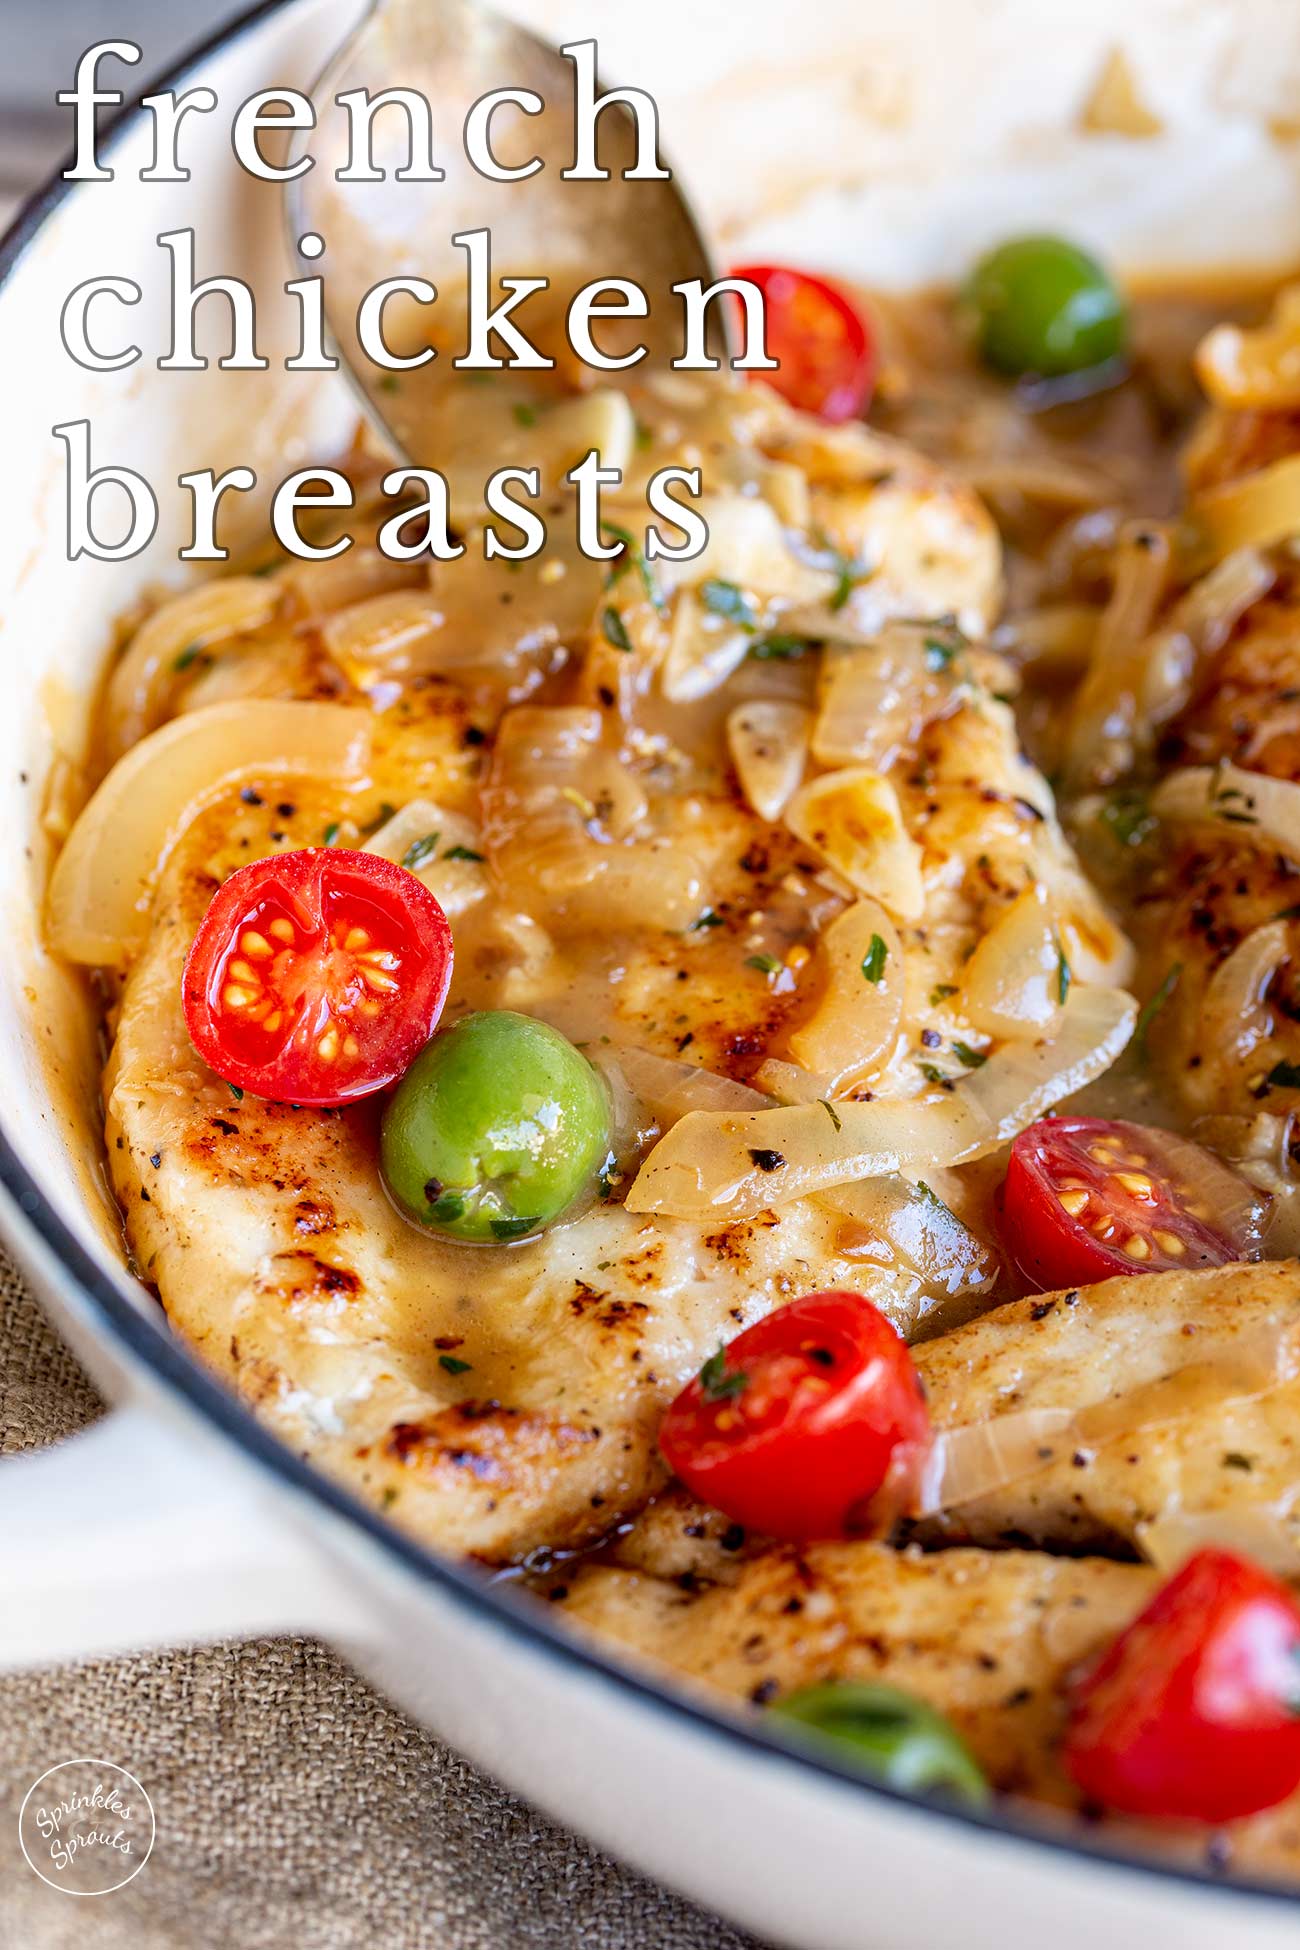 pin image: French chicken breasts in a pan with text overlaid